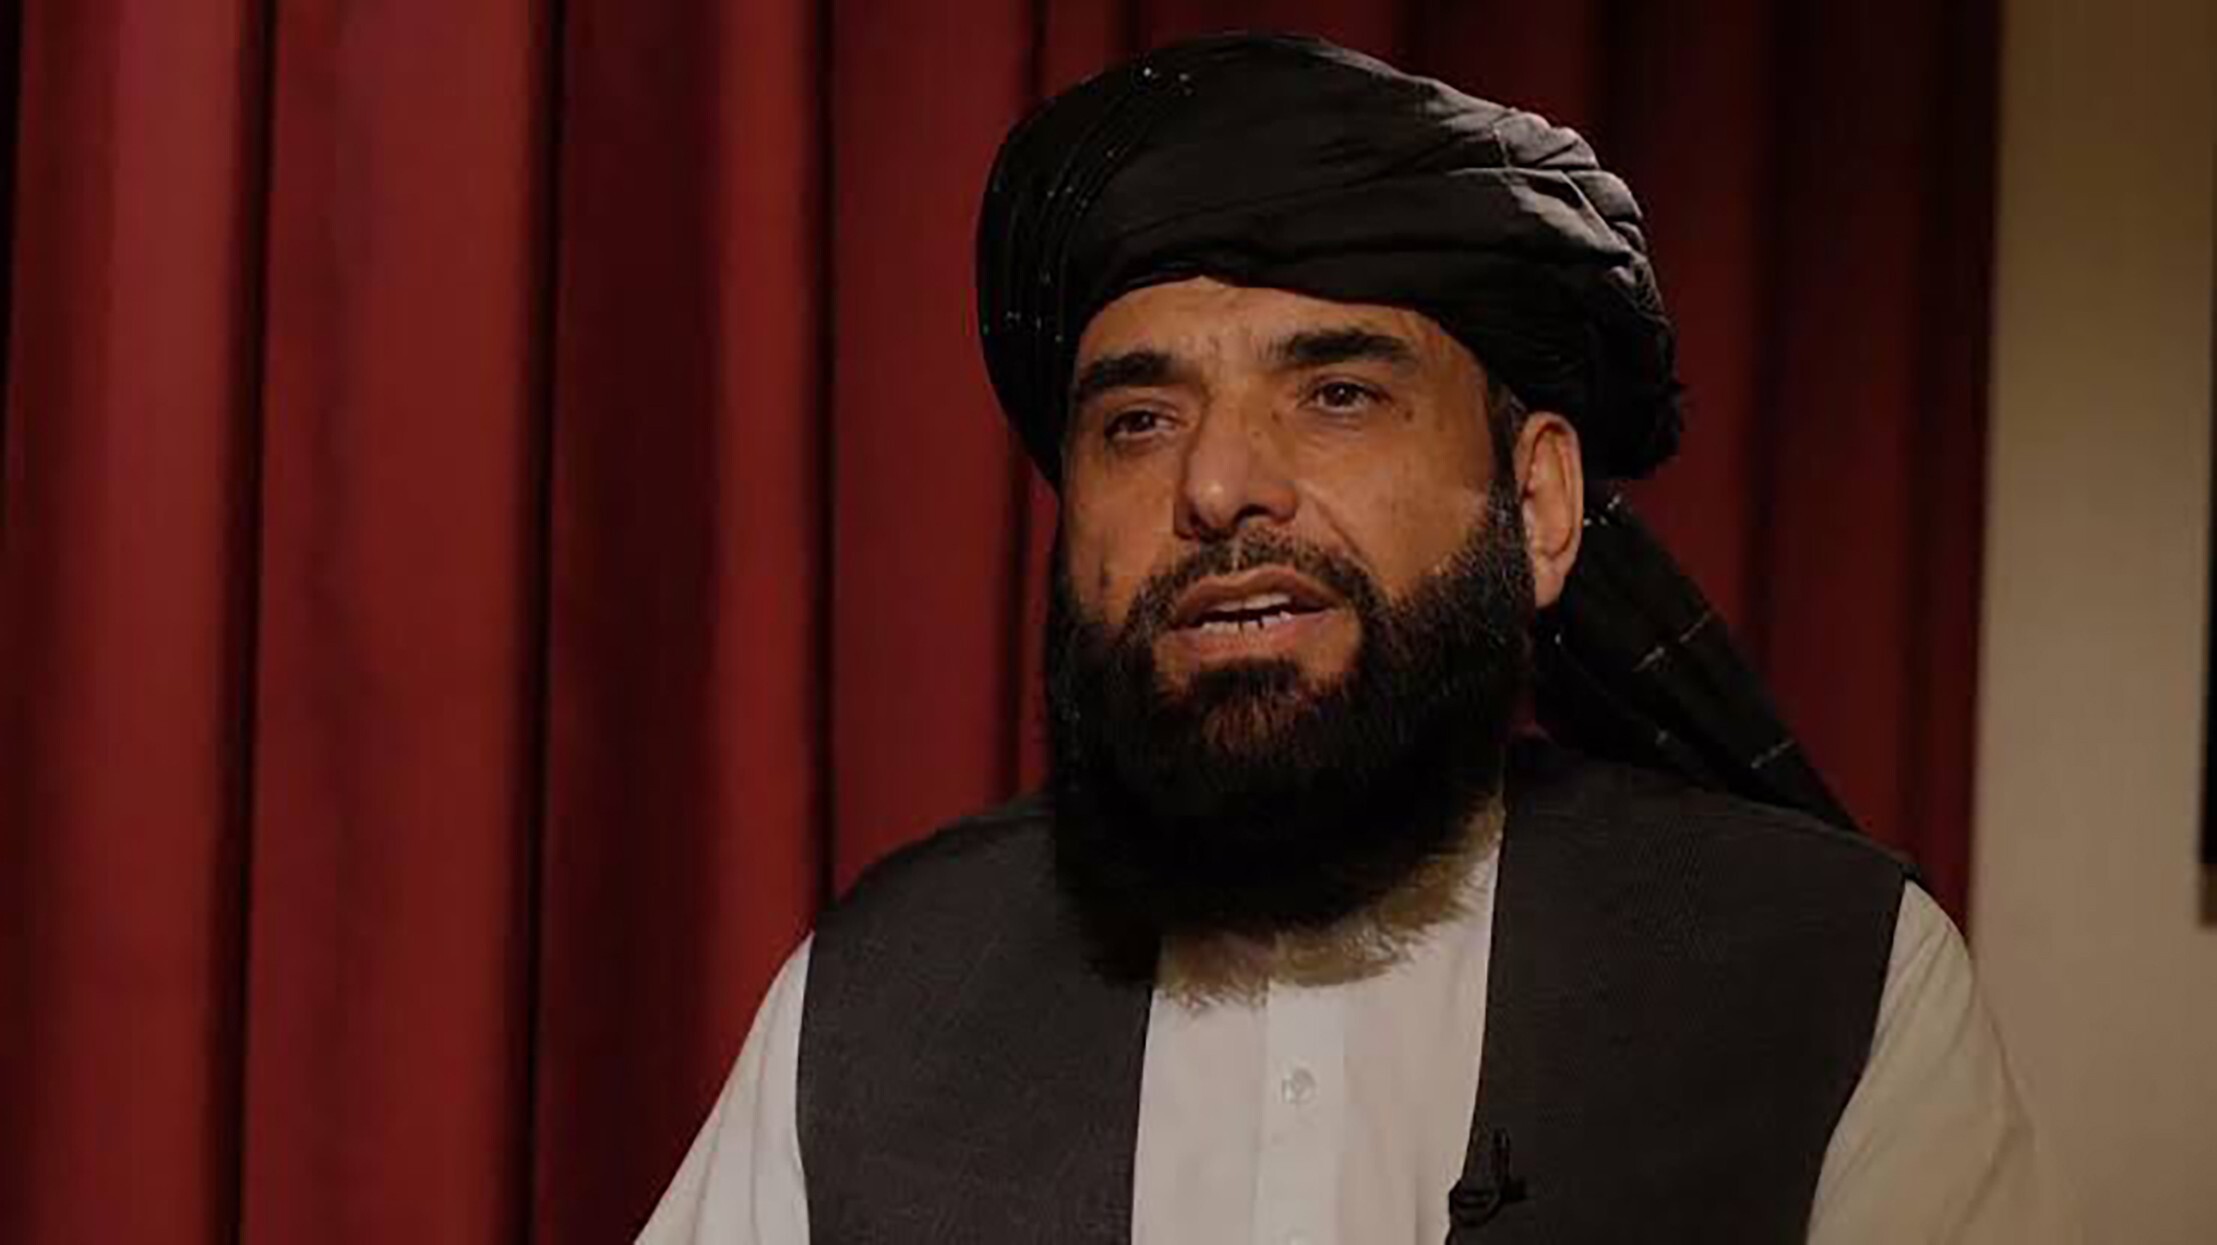 Suhail Shaheen has been proposed by the Taliban as its UN representative. Photo: Twitter